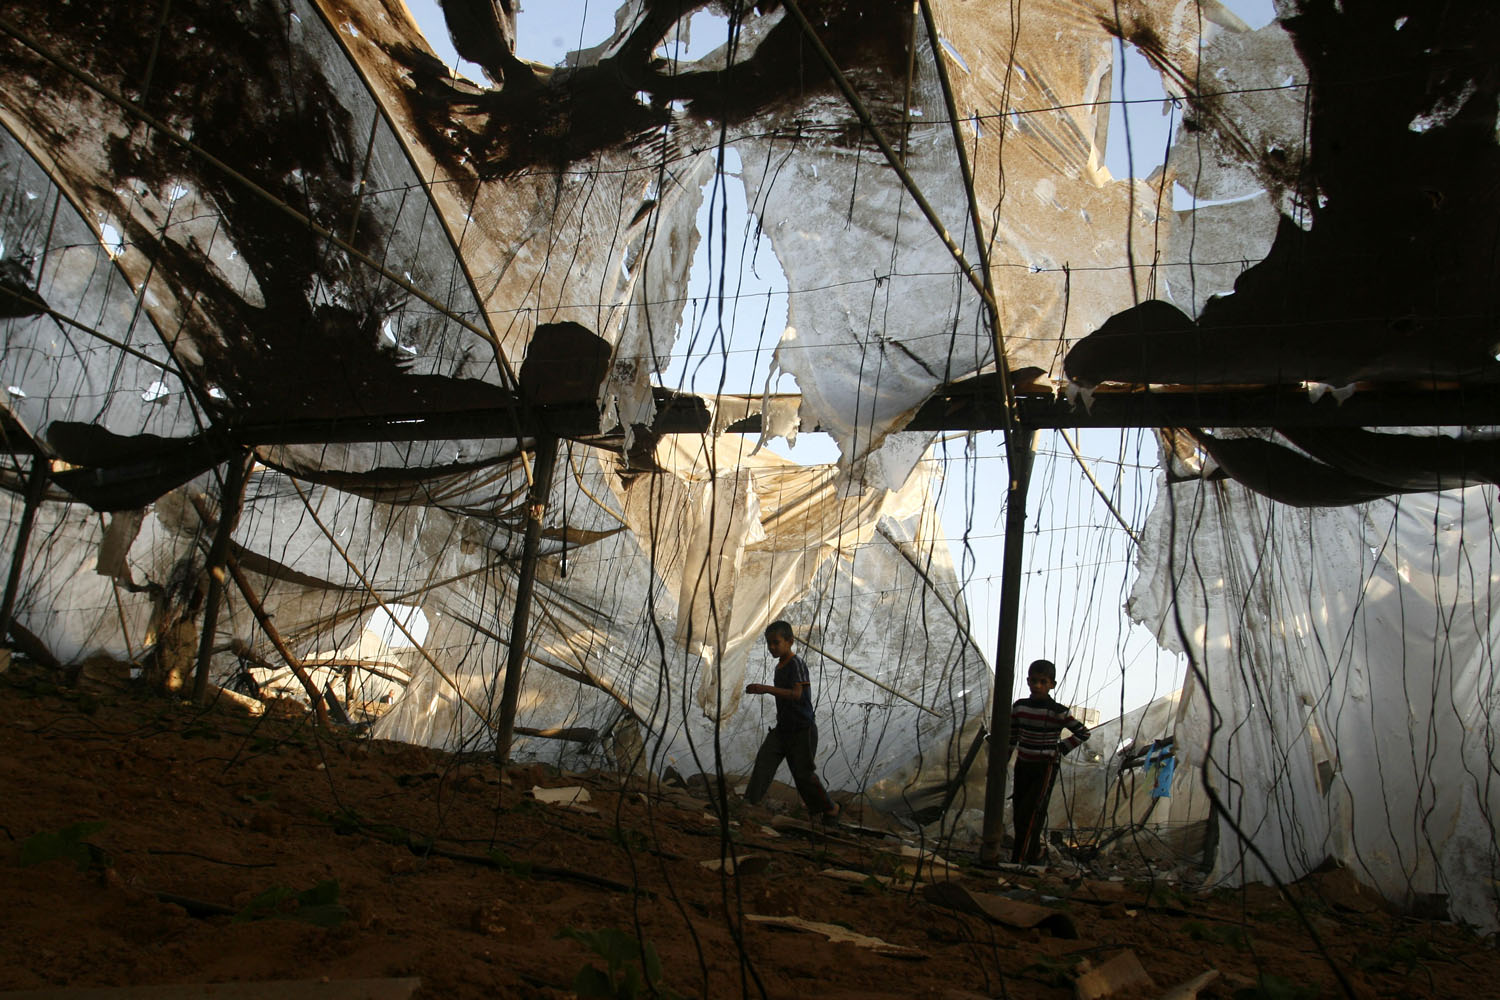 June 5, 2012. Palestinians inspect the damage at a chicken farm in the southern Gaza Strip town of Rafah following an Israeli air strike.